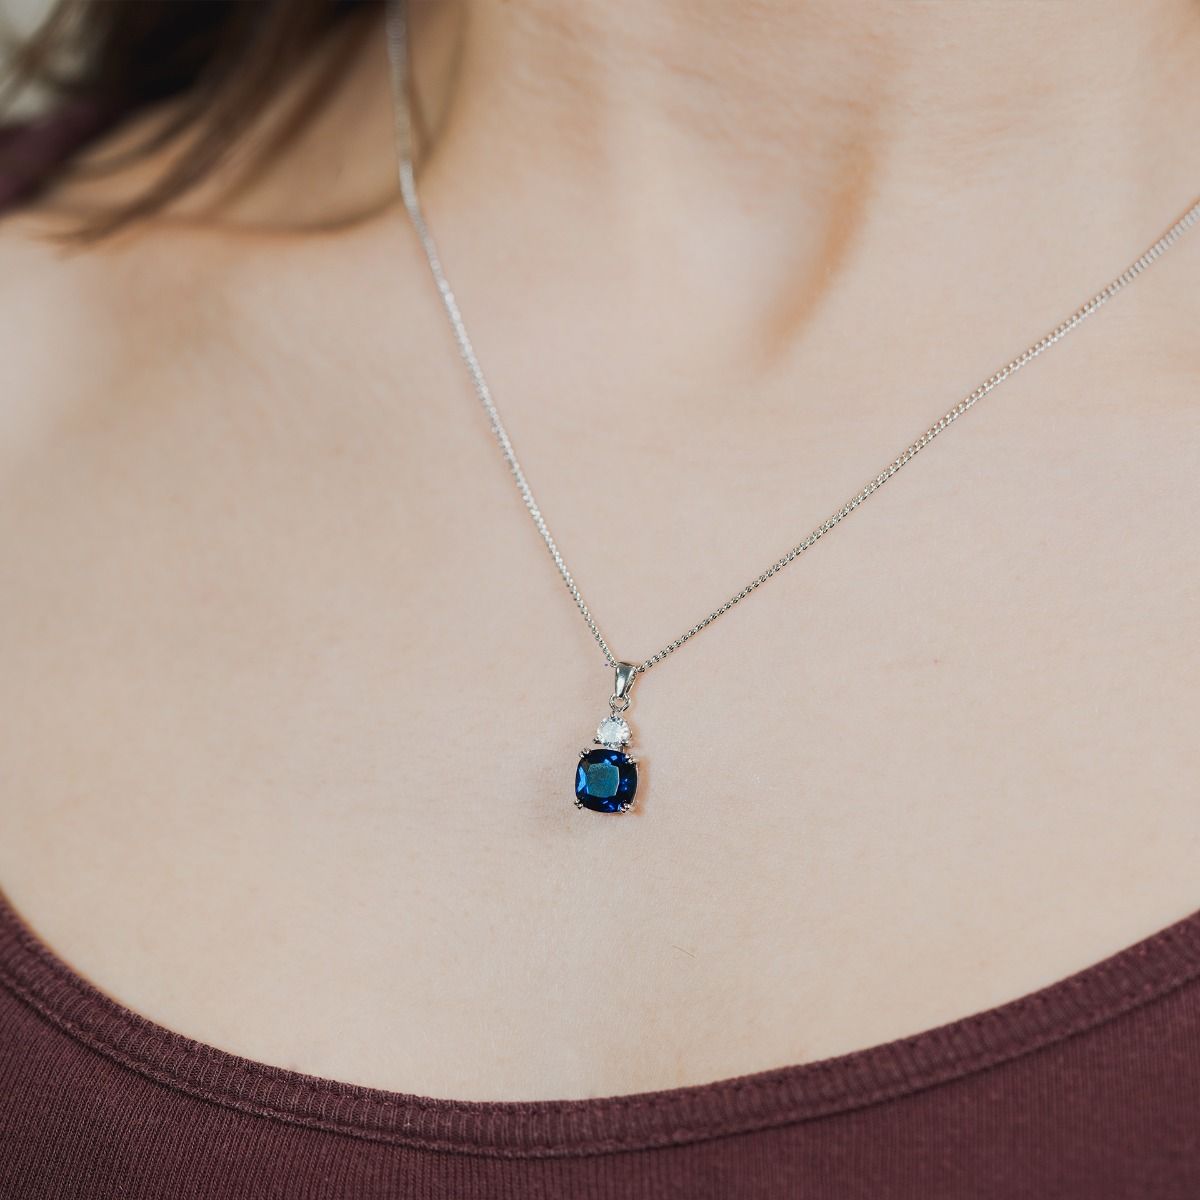 Discover the enchantment within our Sapphire Cushion Double Drop Pendant. A stunning halo of flawlessly cut cubic zirconia stones encircles an impressive cushion-cut centre stone in a captivating Sapphire hue. 